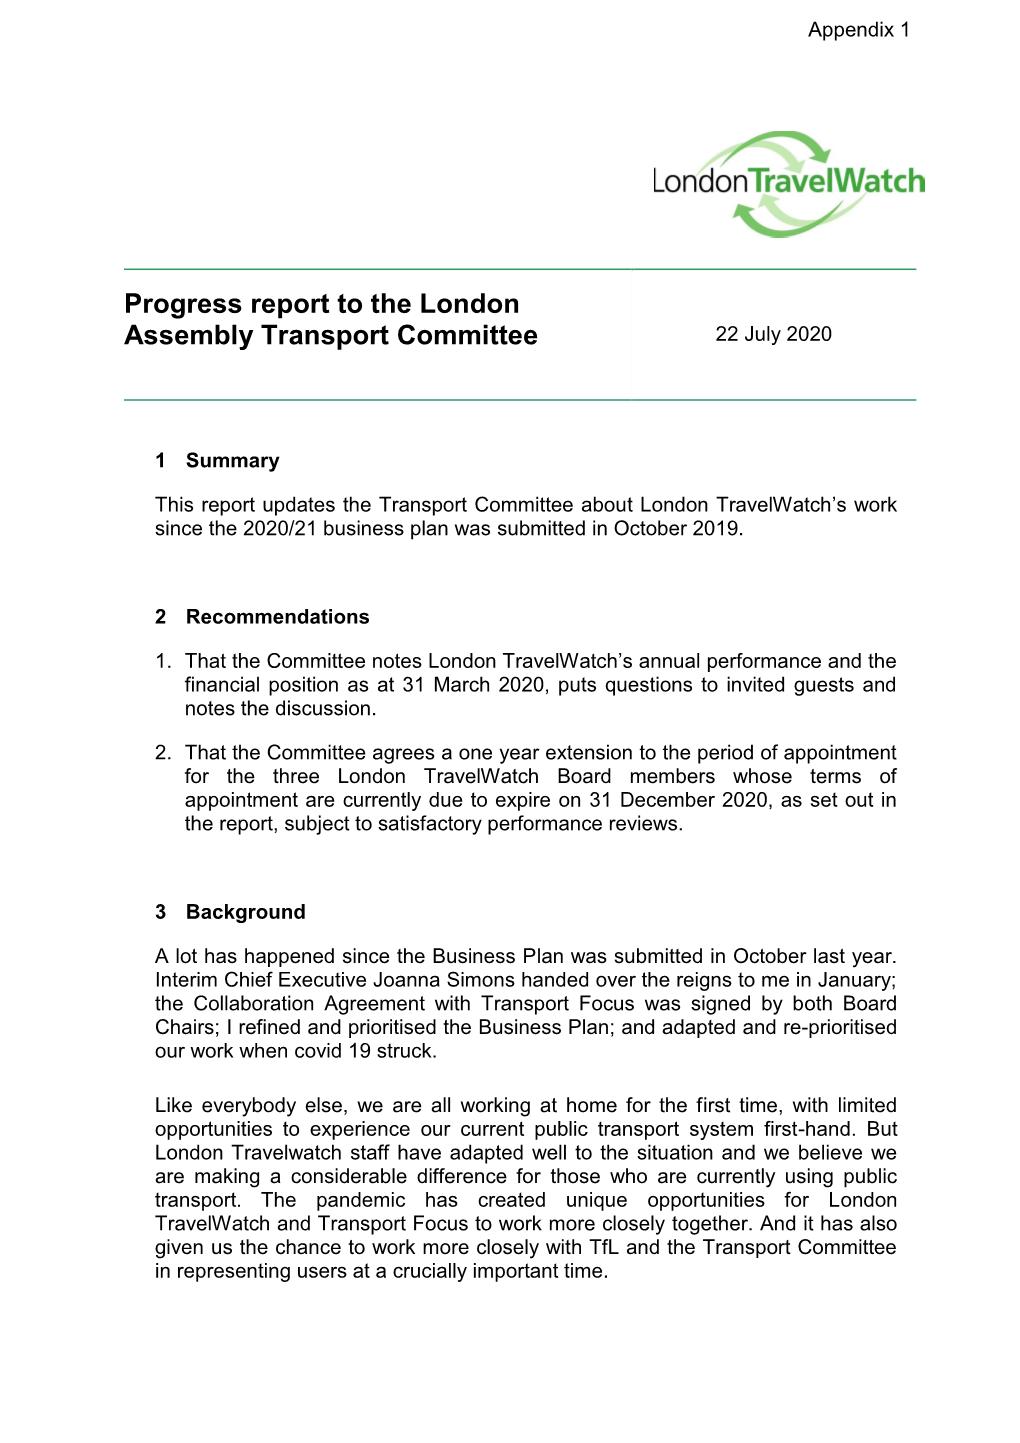 Progress Report to the London Assembly Transport Committee 22 July 2020